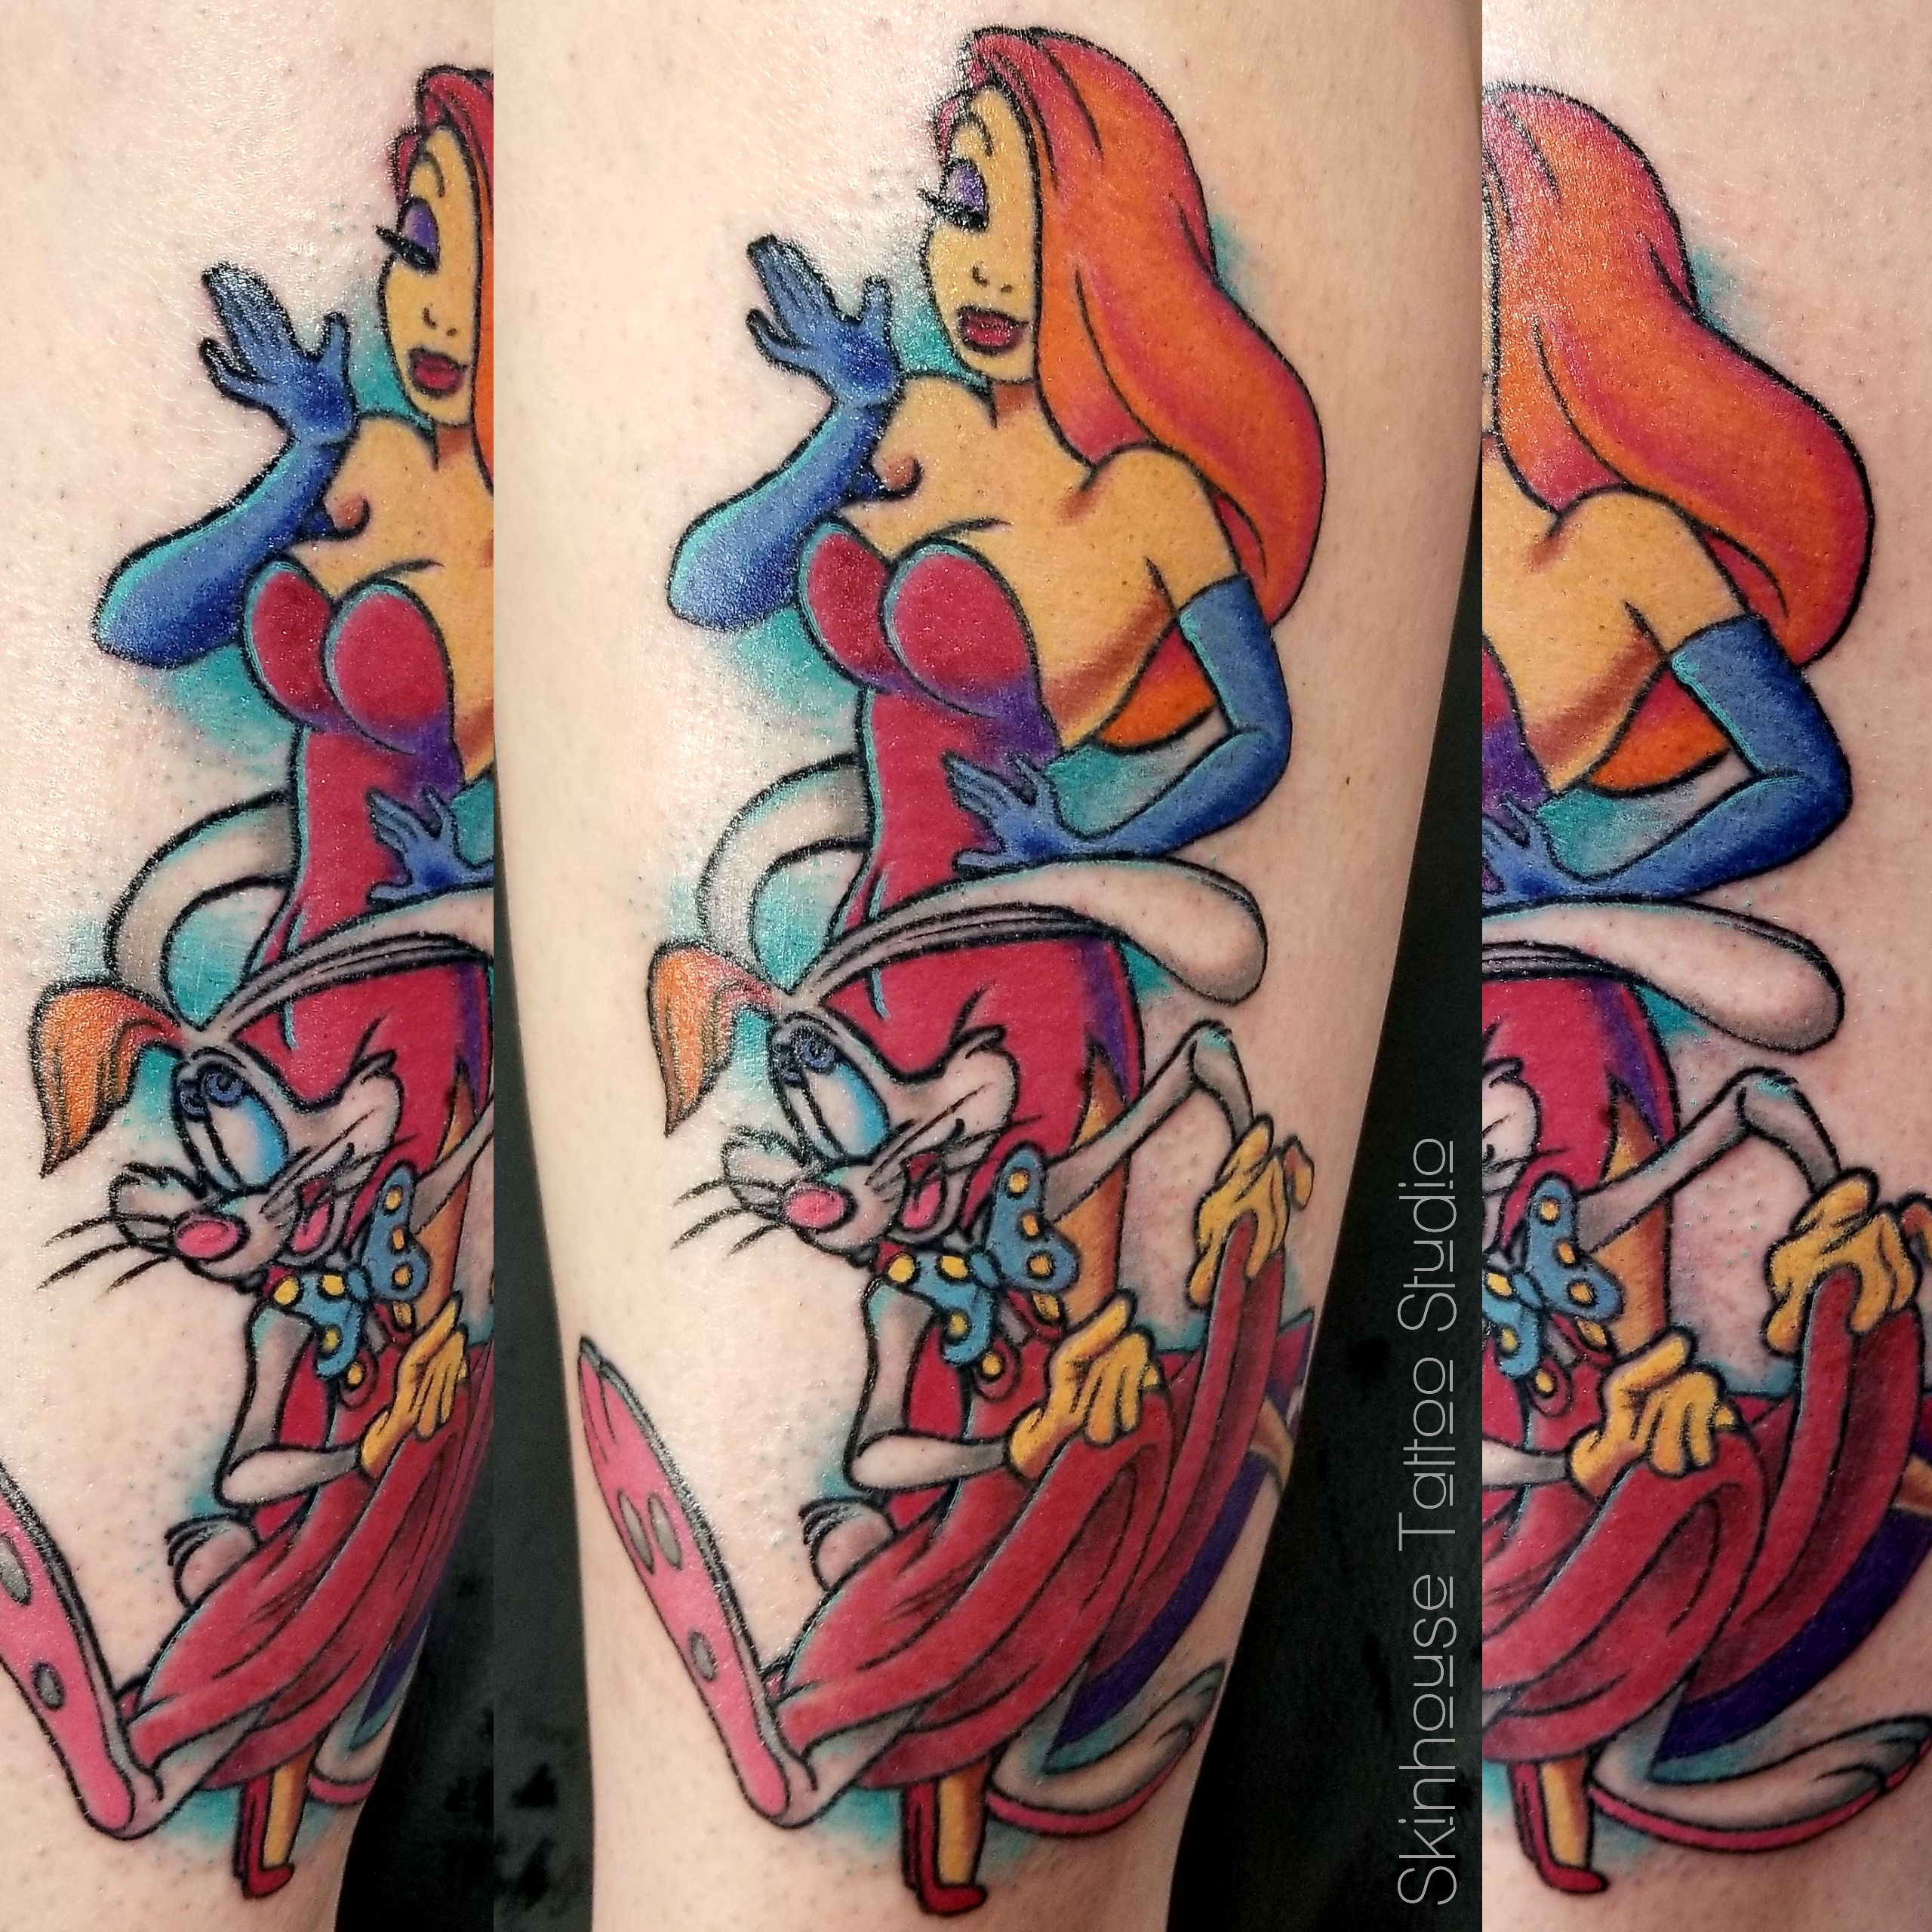 Who framed roger rabbit tattoo  Littered With Garbage